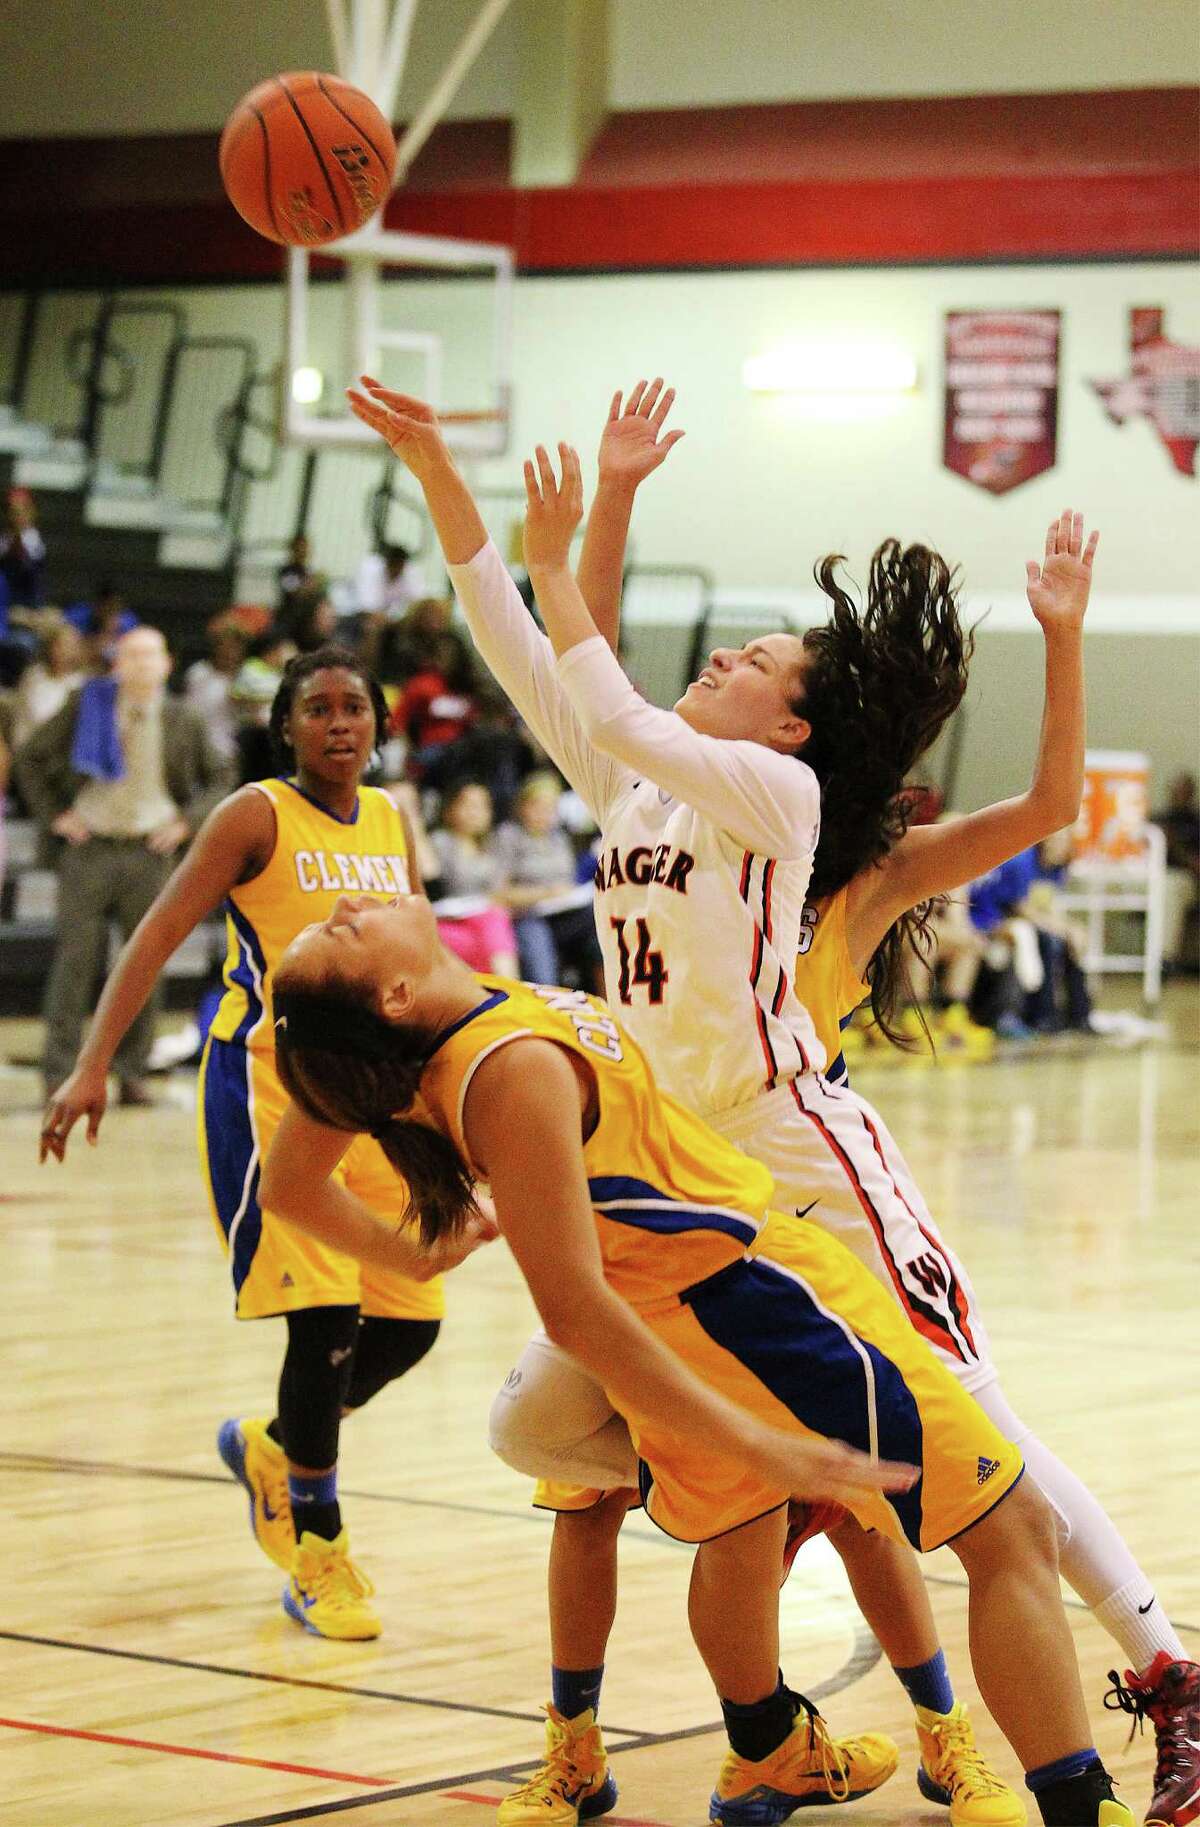 Wagner’s Amber Ramirez takes a shot inside over Clemens’ Kennedi Centers.